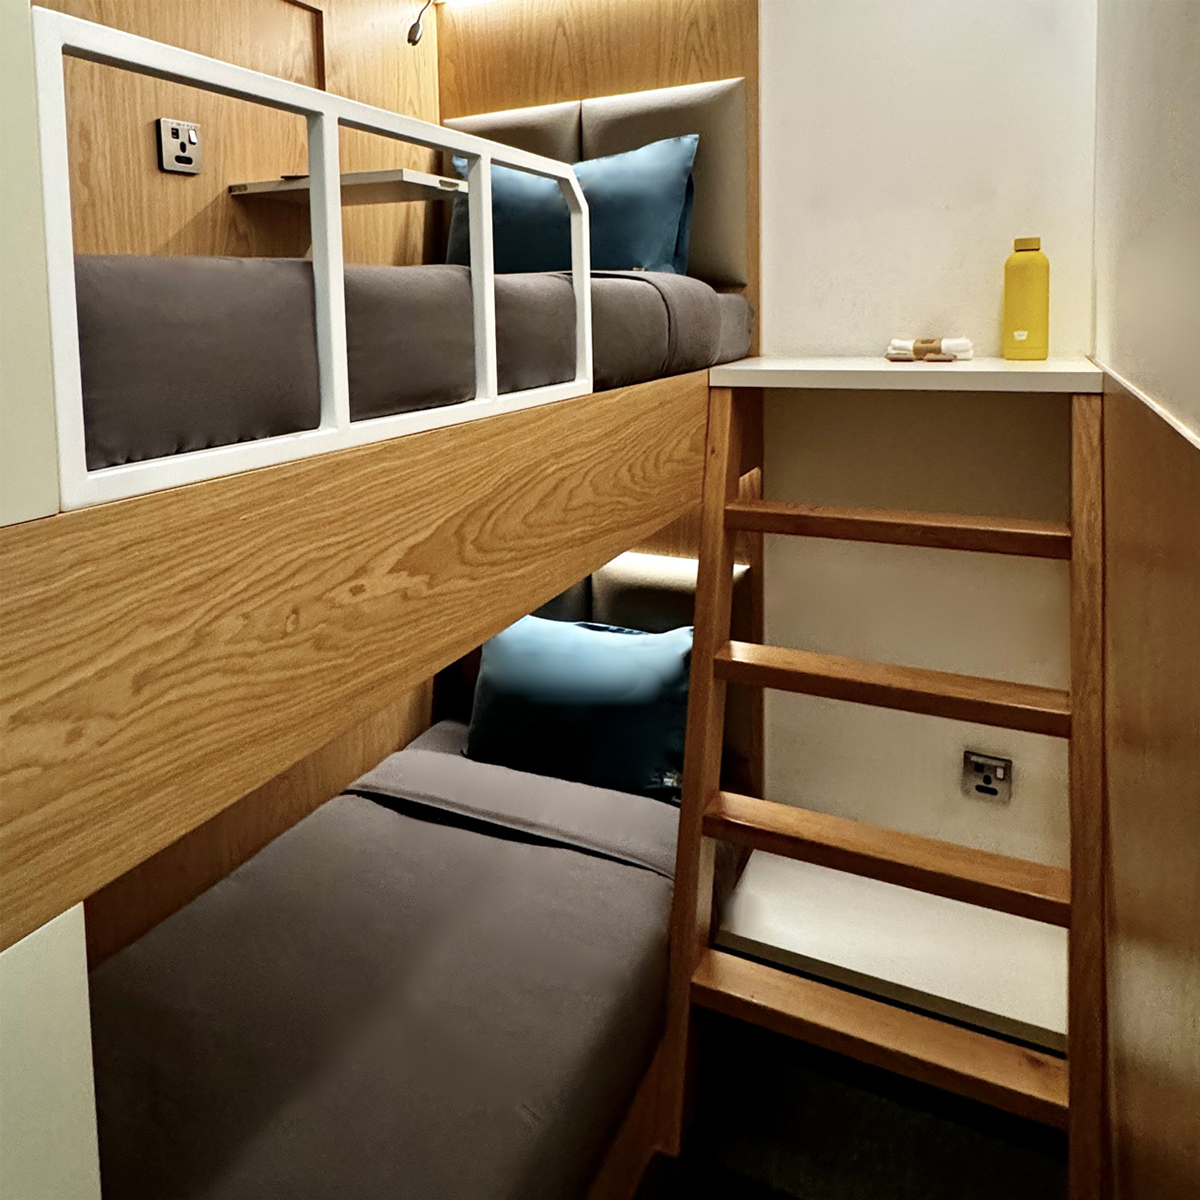 sleep 'n fly, Dubai Airport, bunk cabin room with bunk bed